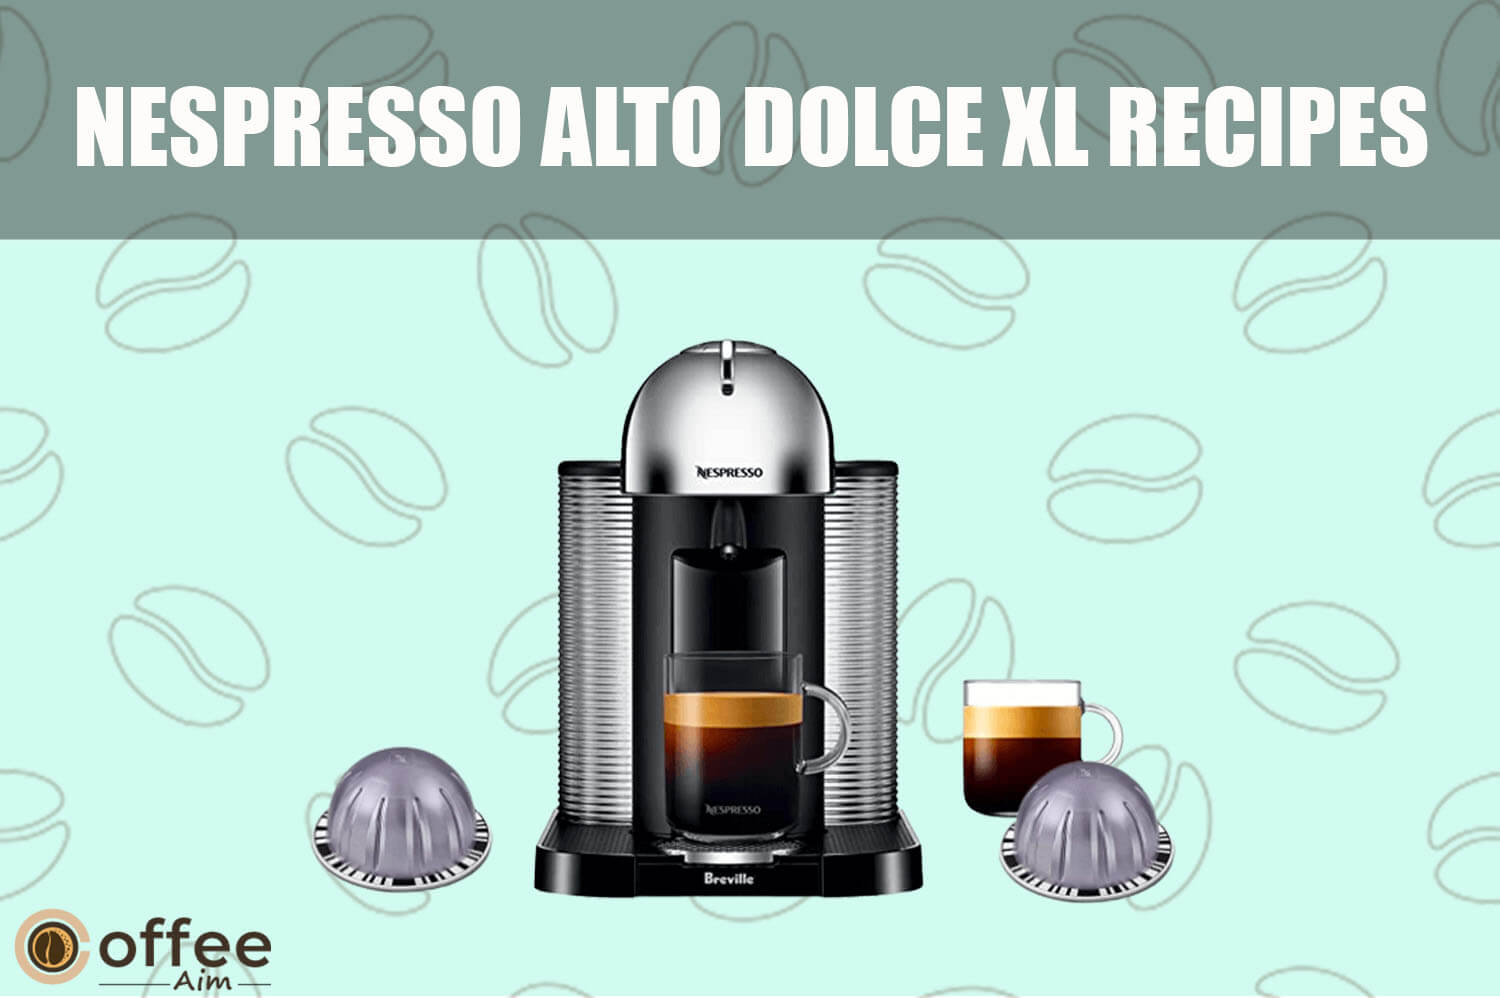 Featured image for the article "Nespresso Alto Dolce XL Recipes"